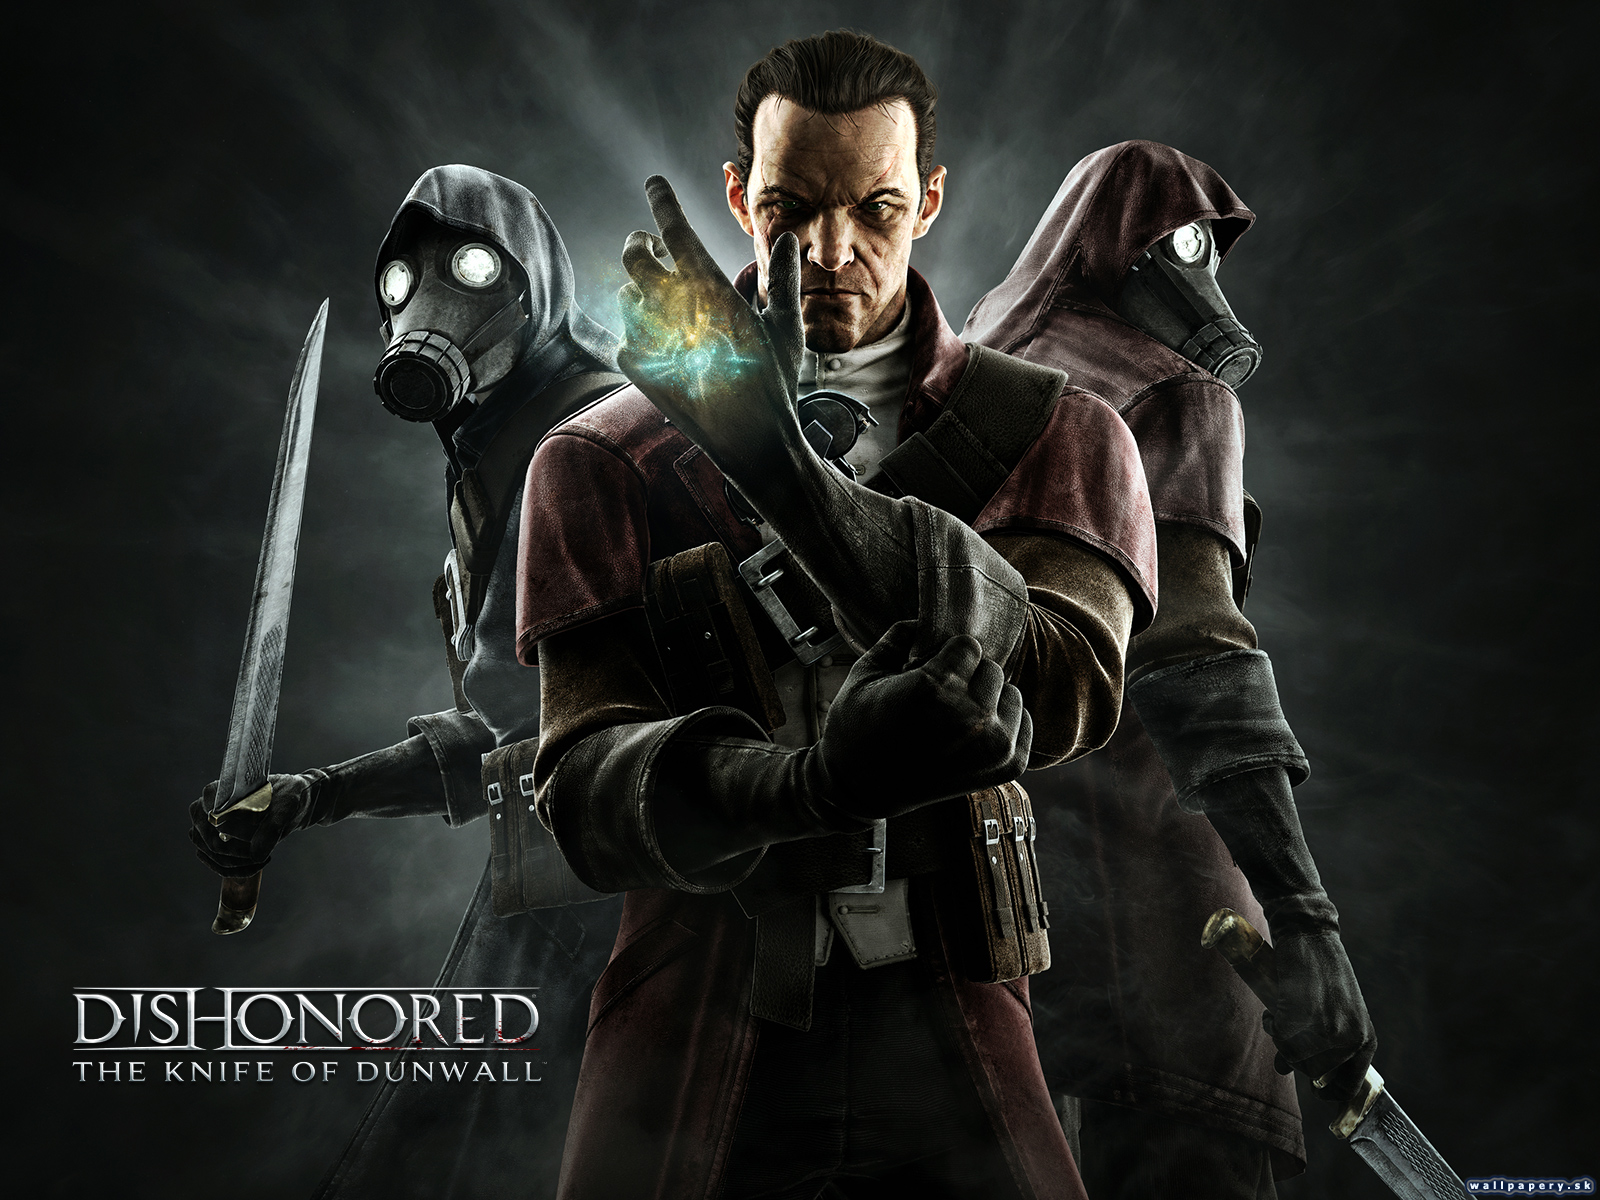 Dishonored: The Knife of Dunwall - wallpaper 1